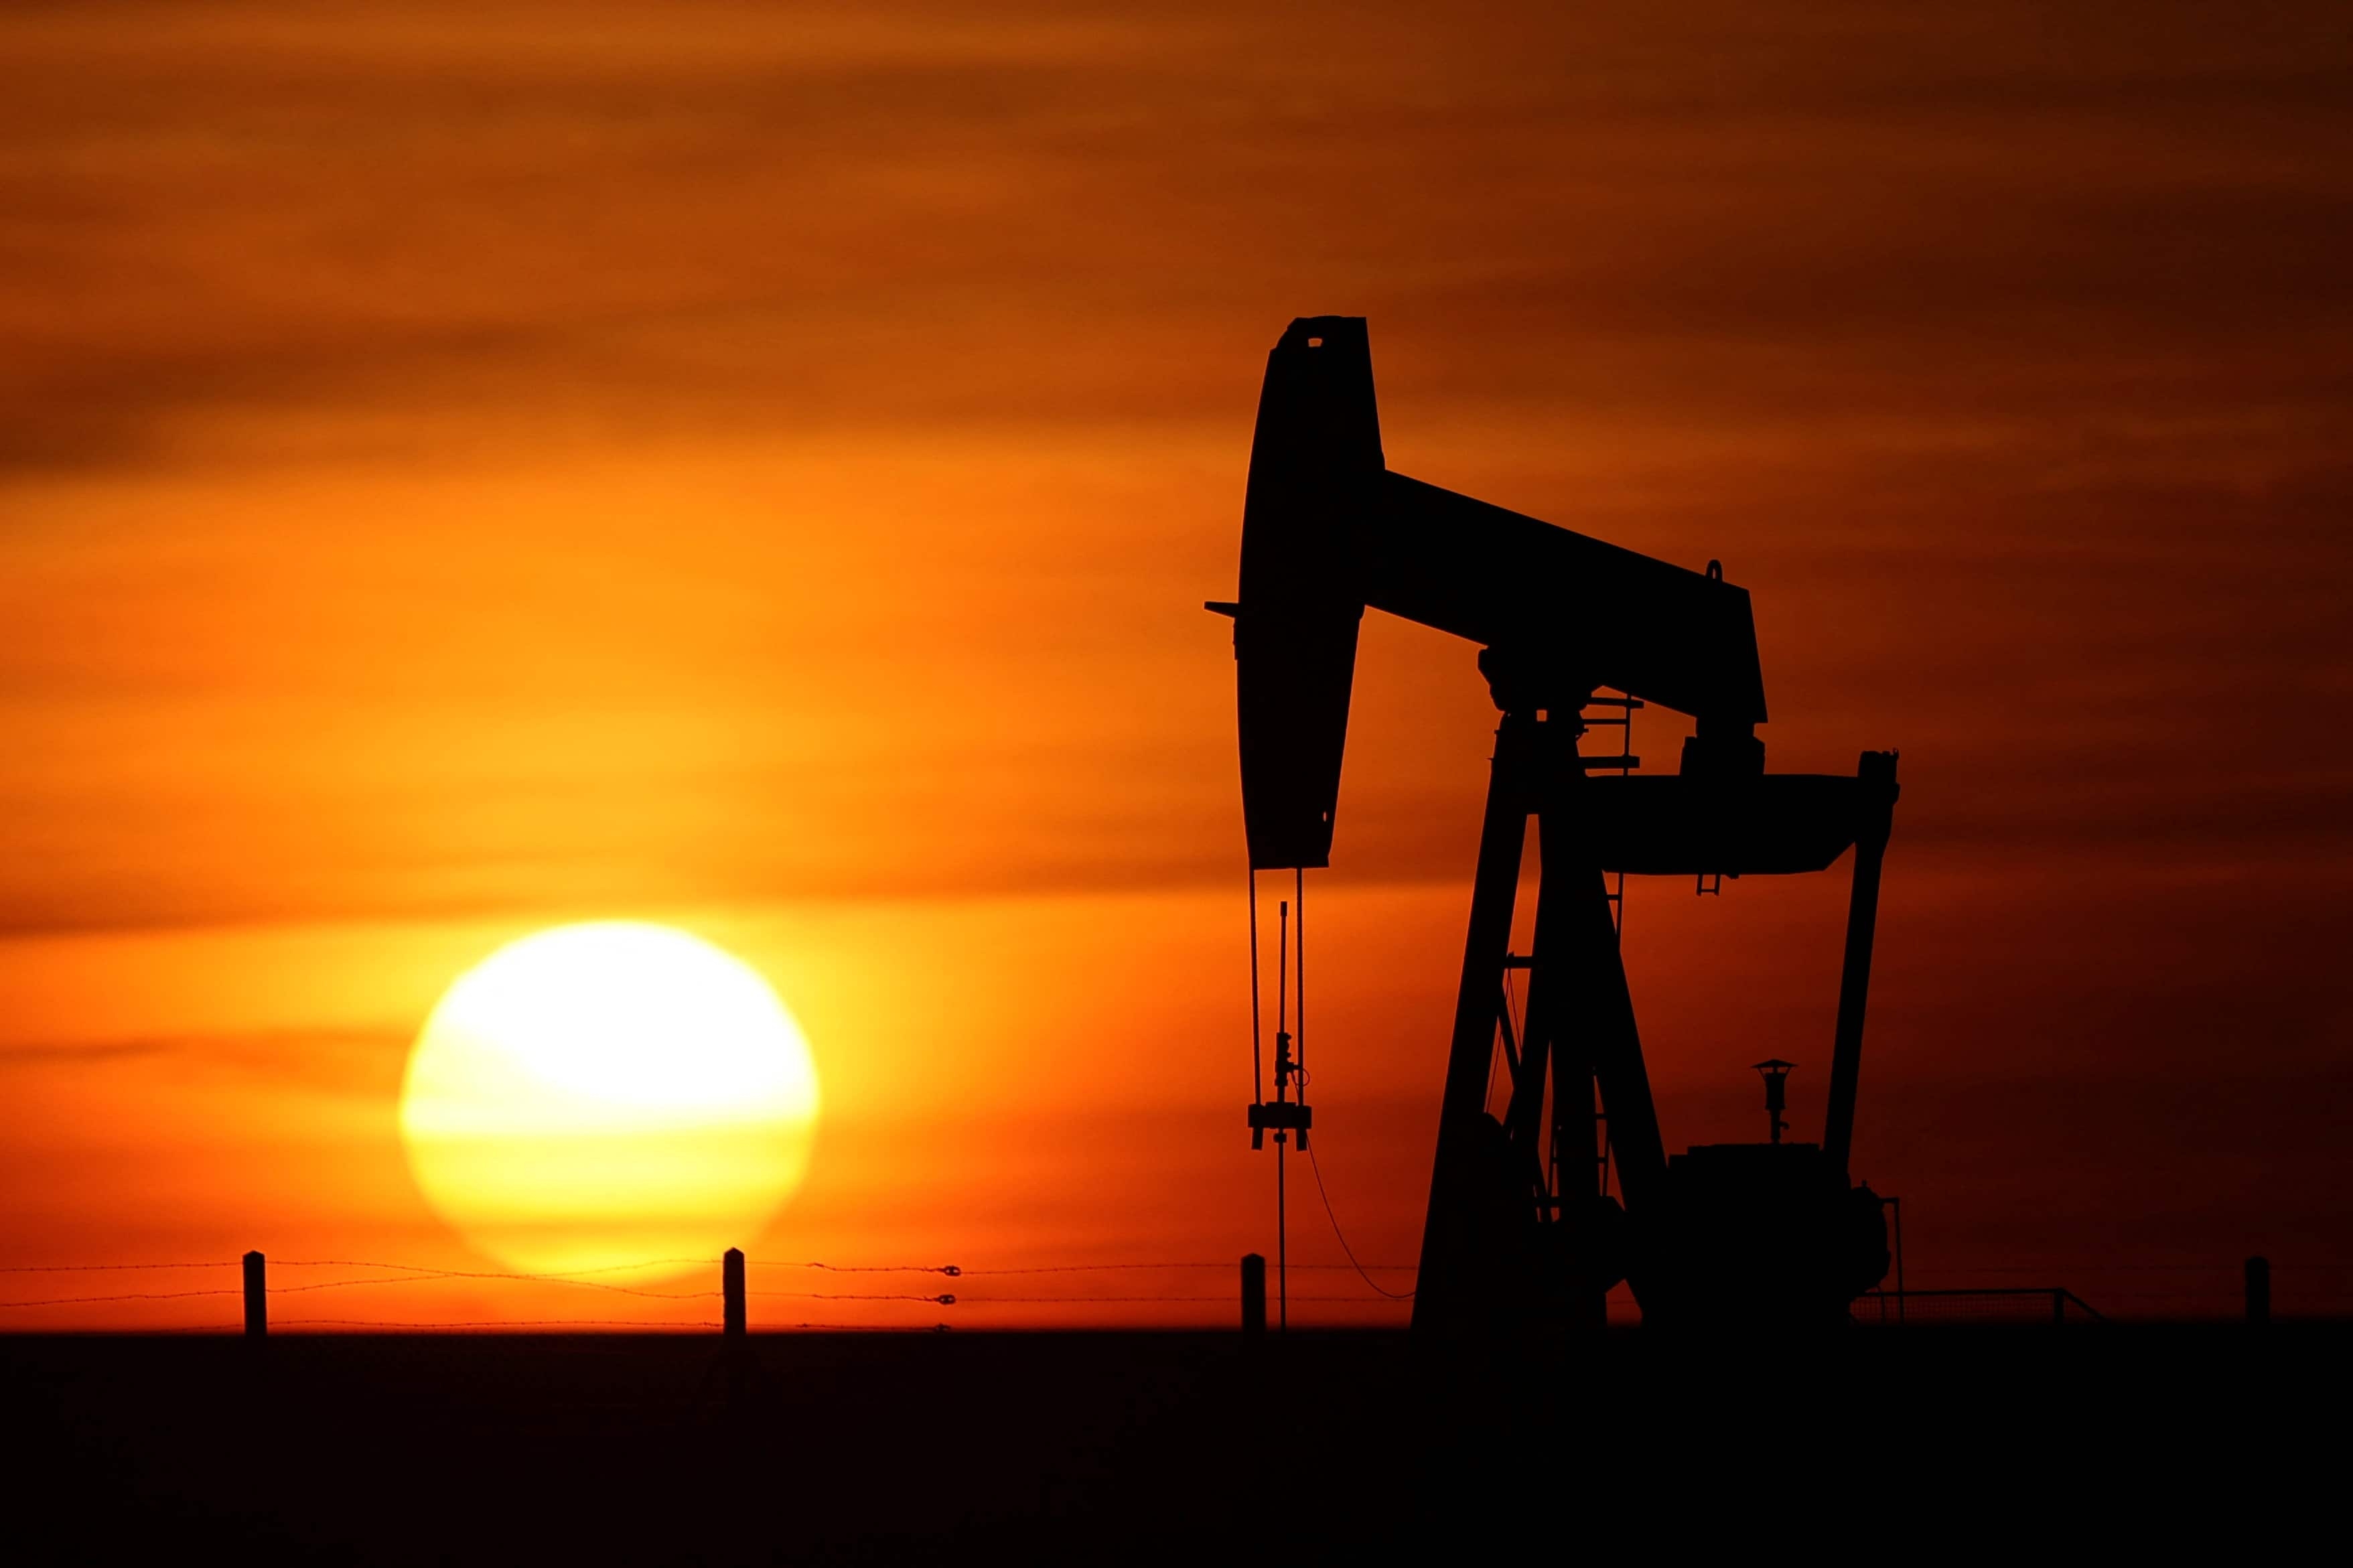 Oil prices rose in early Asian trade on Wednesday, extending gains from the previous session after China's central bank said it would support its economy. Brent crude futures rose to near $106 a barrel. Crude prices rose about 3 percent in the previous session in volatile trade.